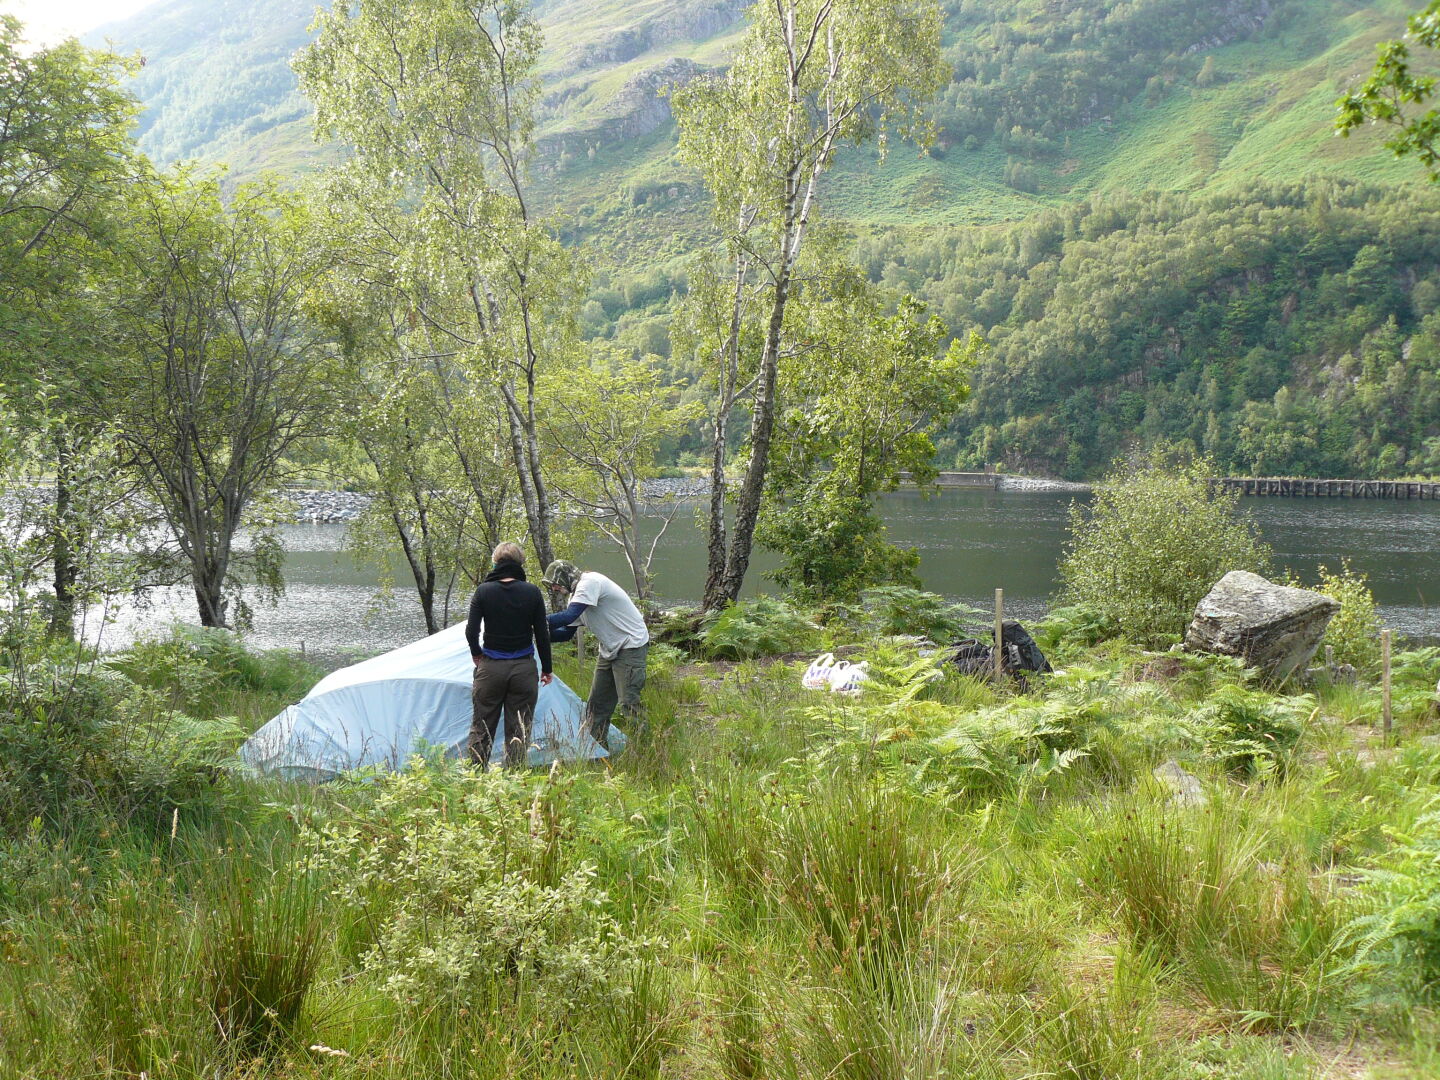 Campsite near Kinlochleven. The fire is supposed to keep the midges away, but I guess they do not know about this. Right photo (c) James Mellors